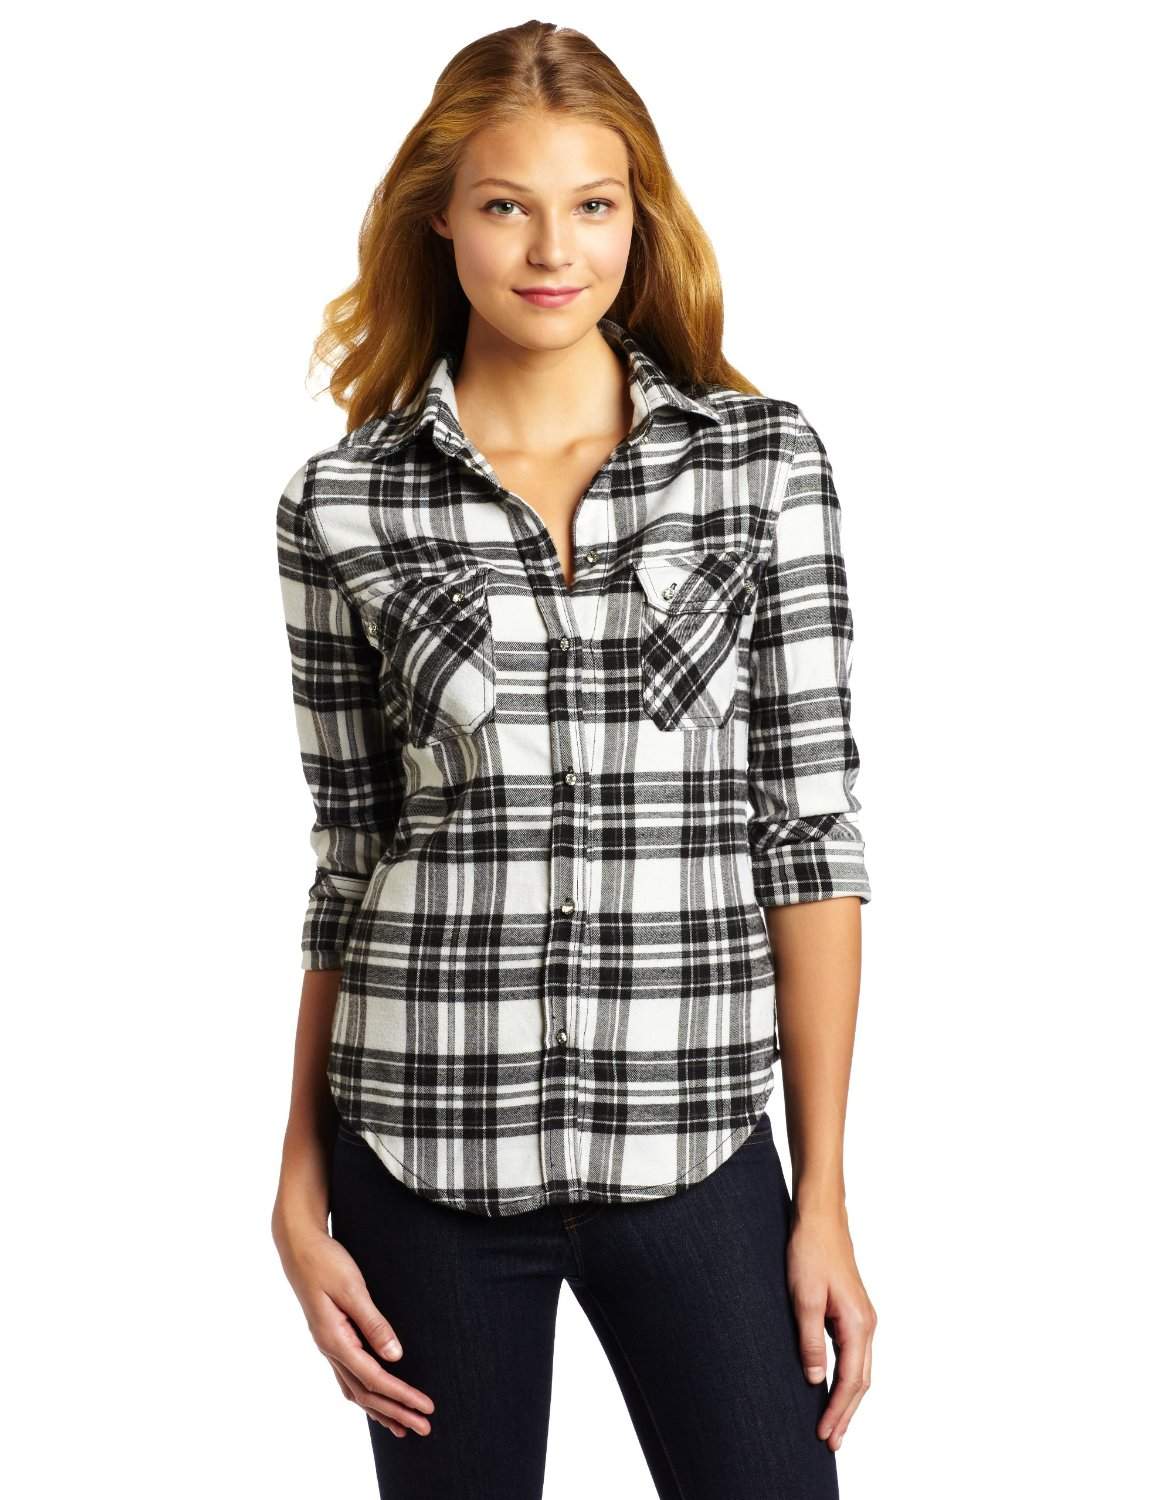 Womens Flannel Shirts: 2012-03-11